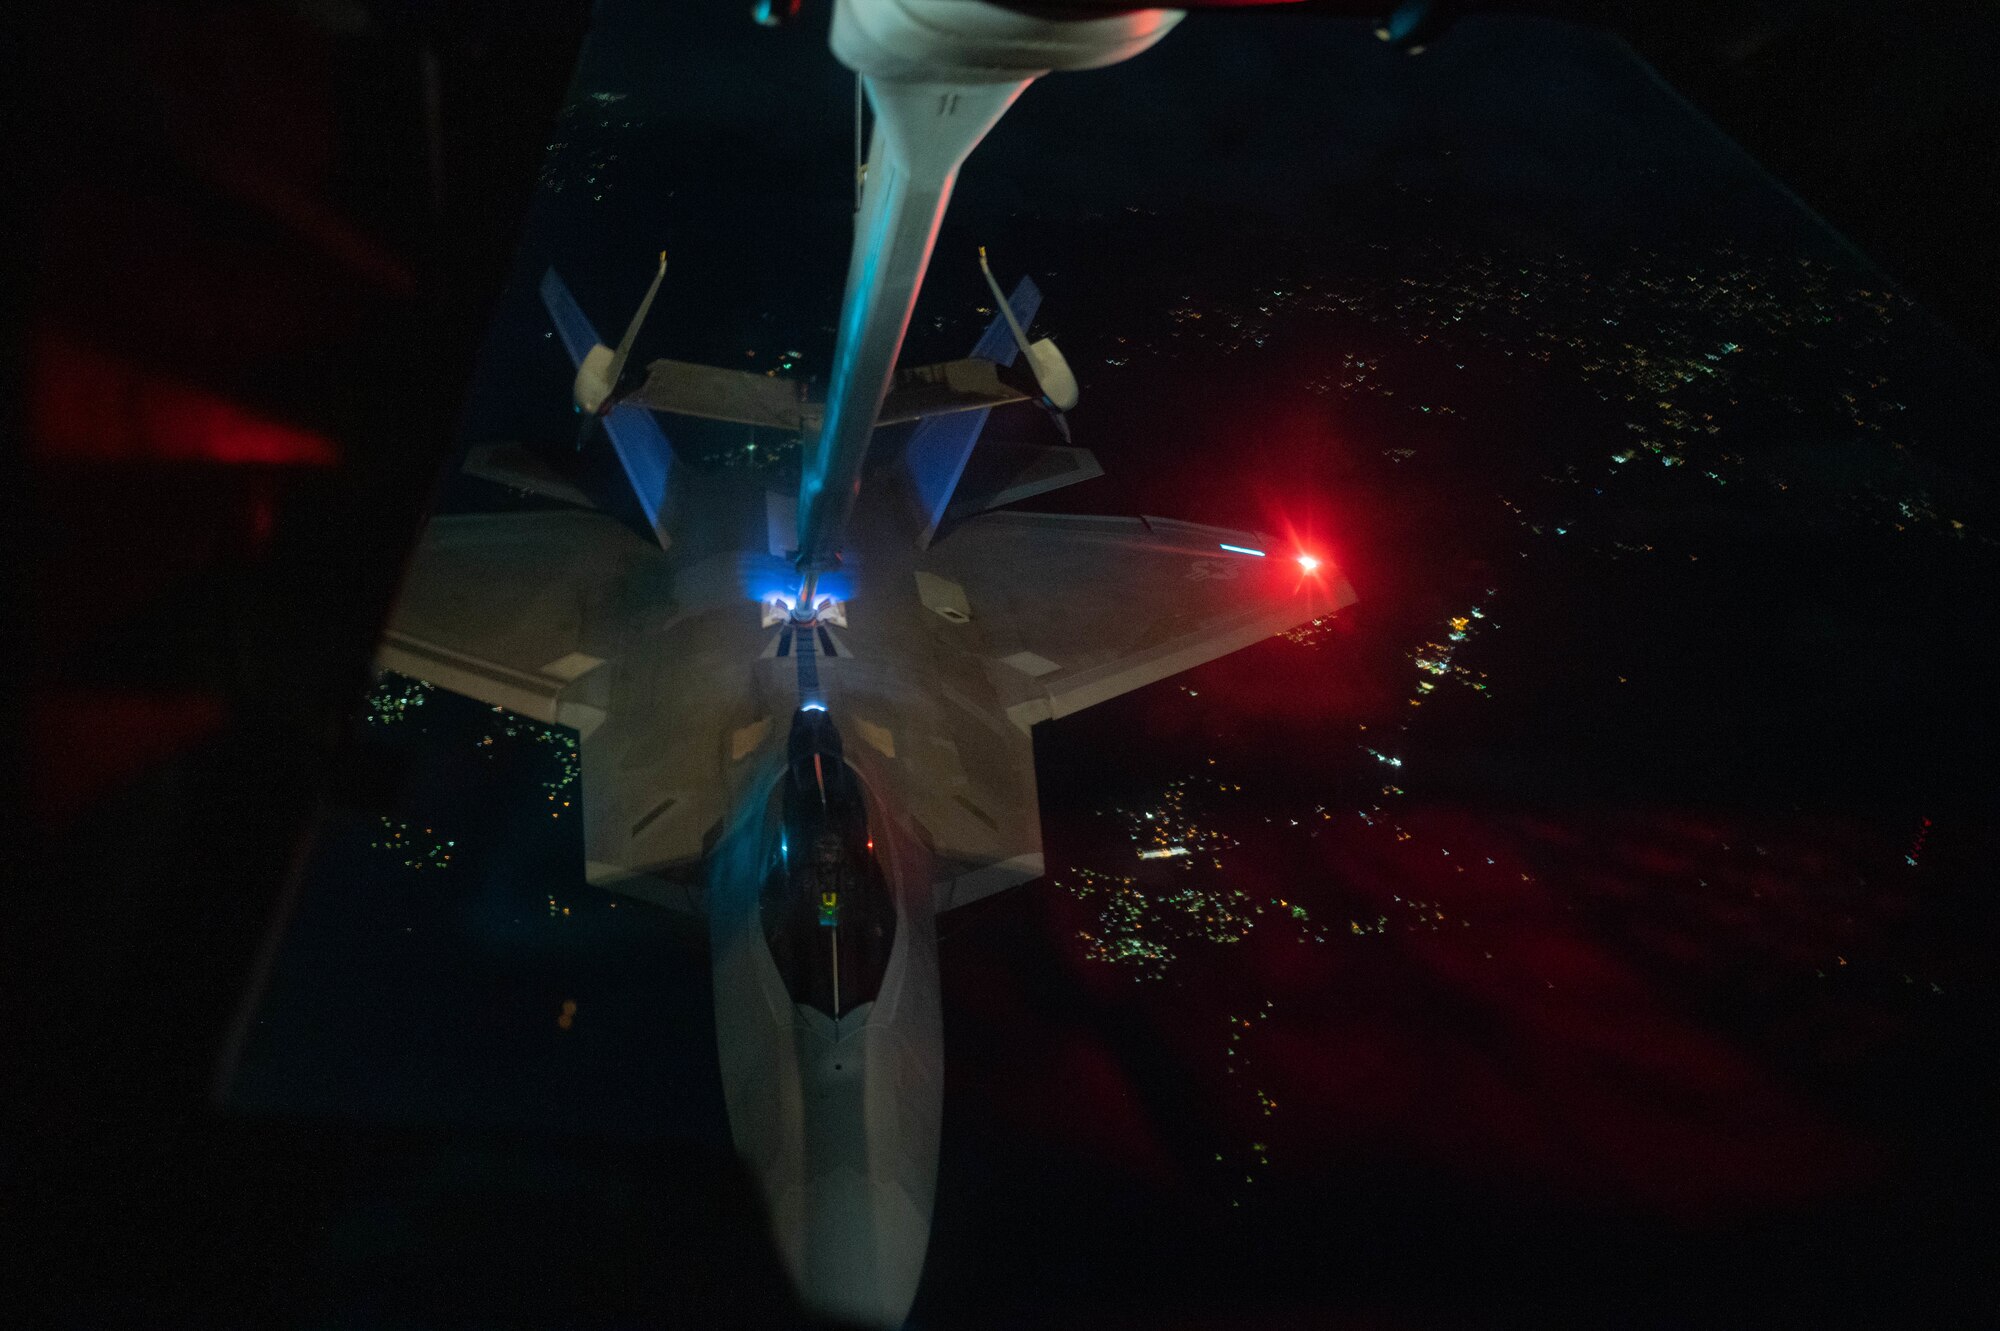 A F-22 Raptor is connected to a boom during an in-flight refueling mission.